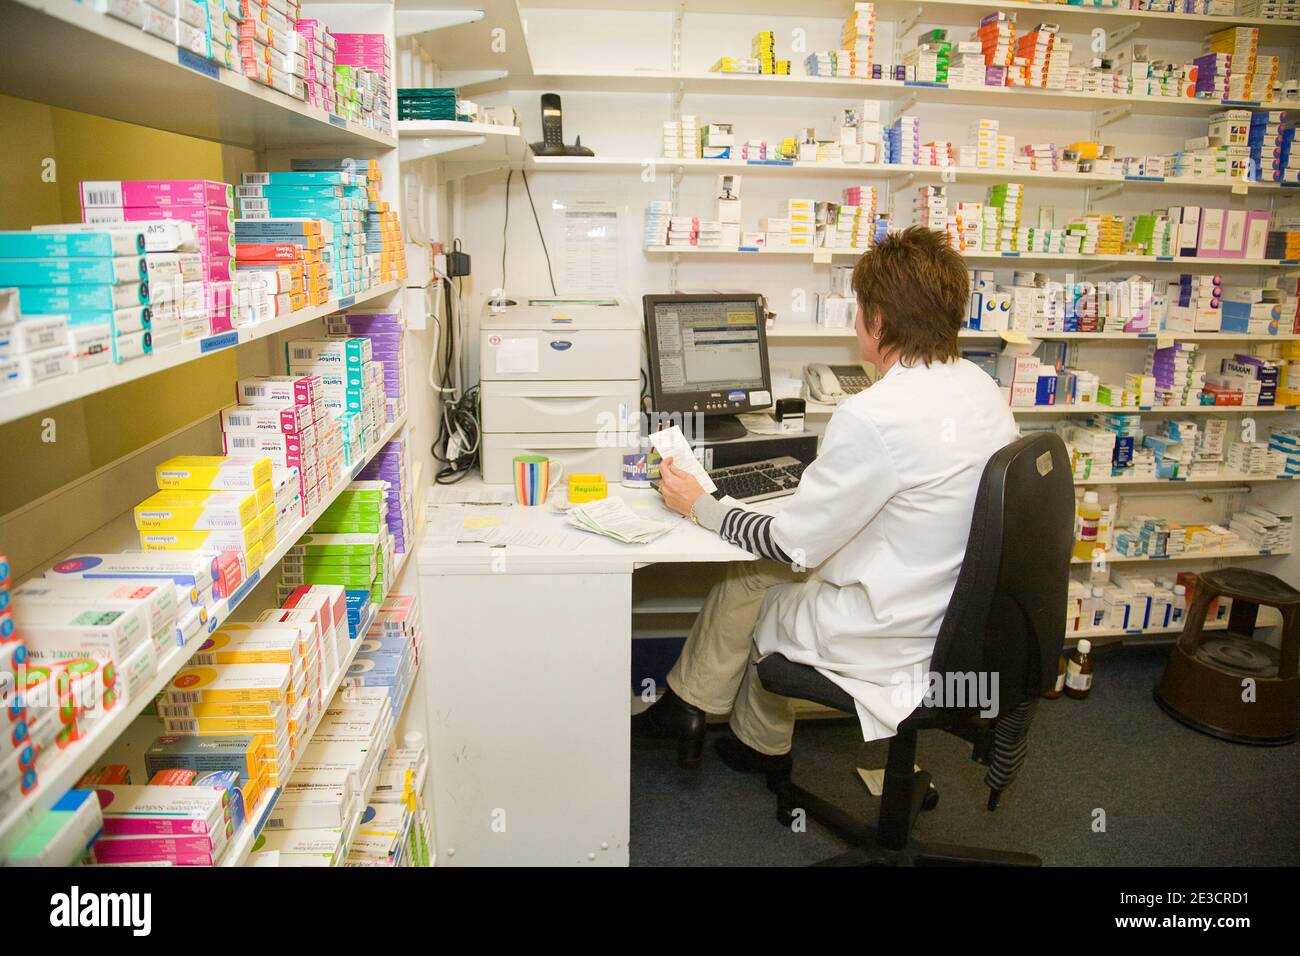 Pharmacy UK; A pharmacist sitting working at the computer in the pharmacy, surrounded by shelves of drug medications, Suffolk England UK. UK worker. Stock Photo